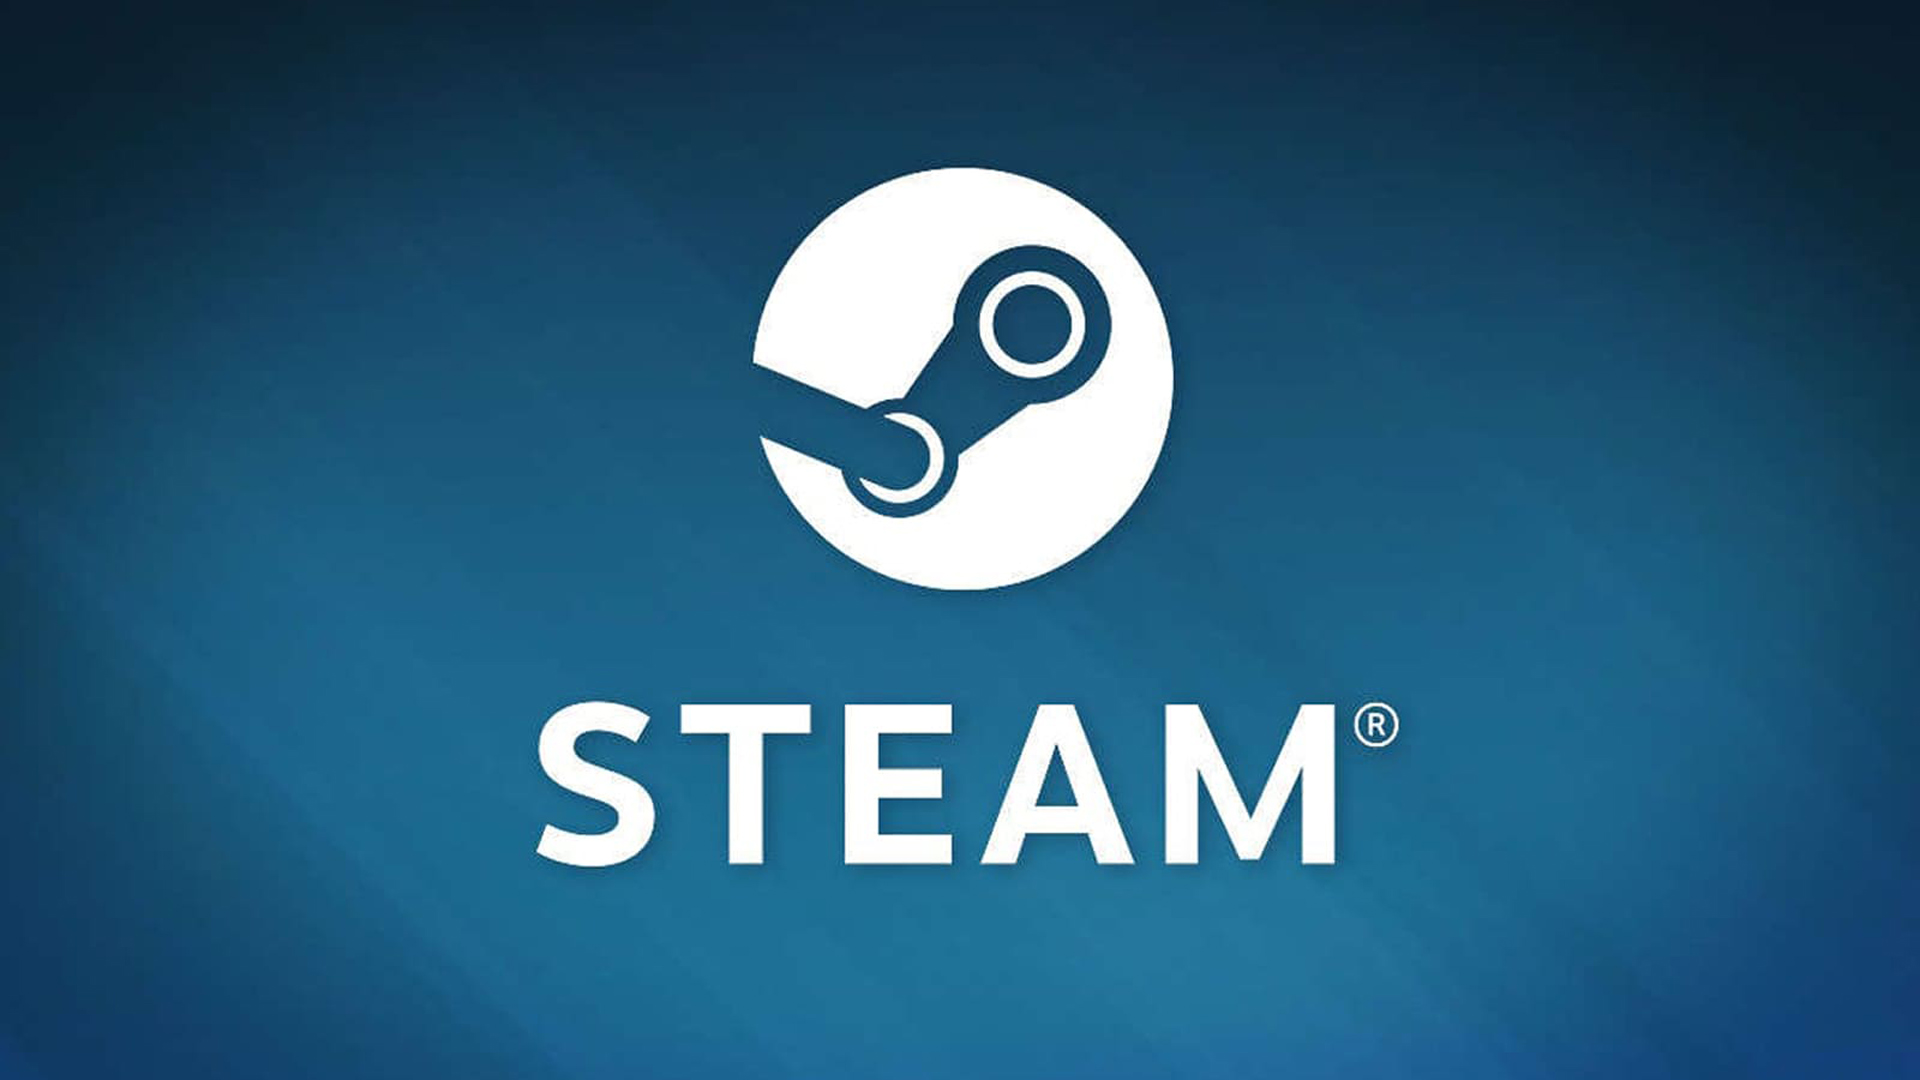 Steam just beat another record with 27 million concurrent users